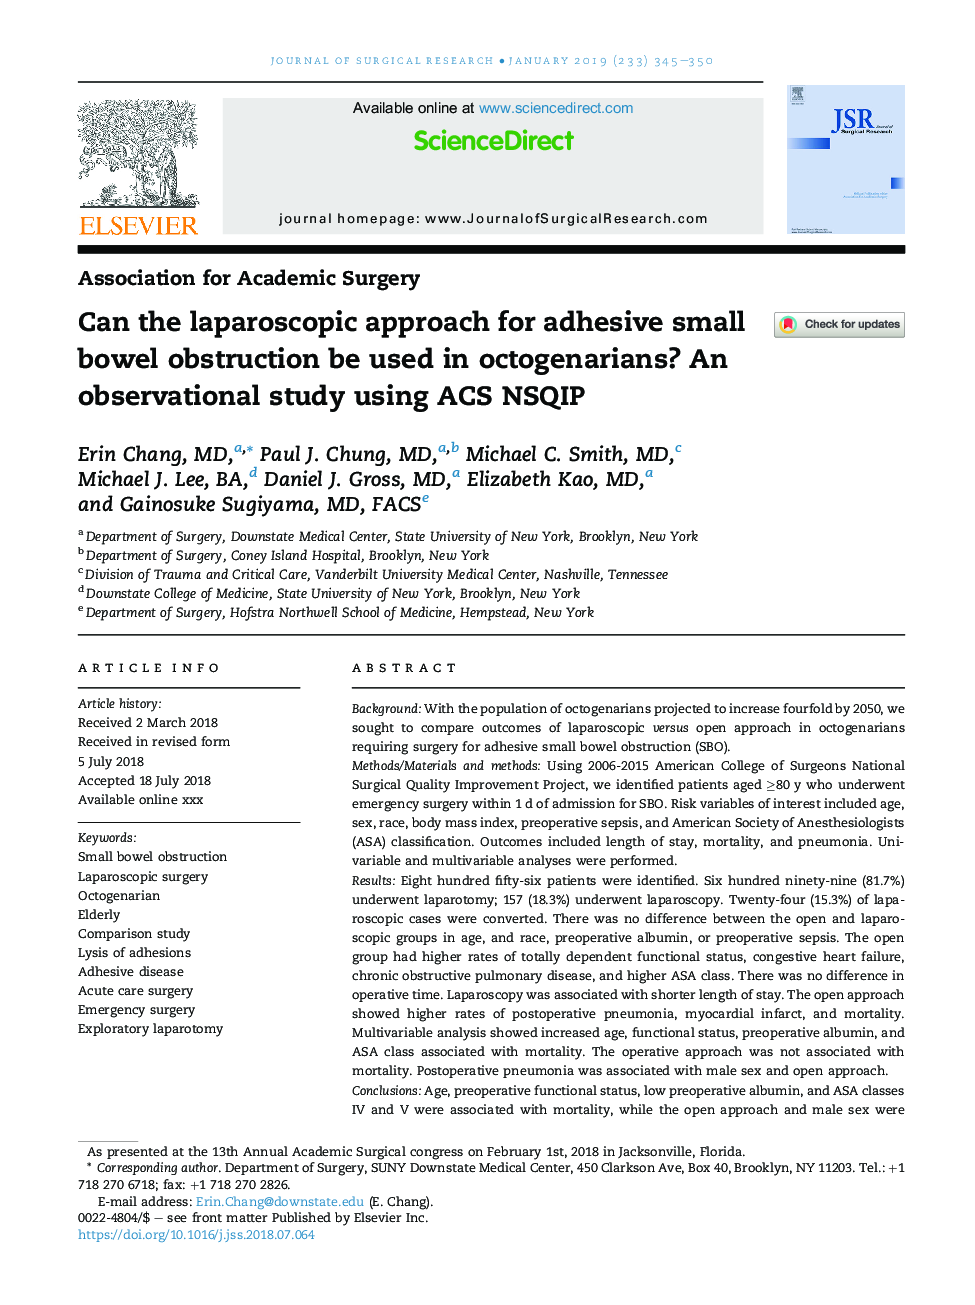 Can the laparoscopic approach for adhesive small bowel obstruction be used in octogenarians? An observational study using ACS NSQIP